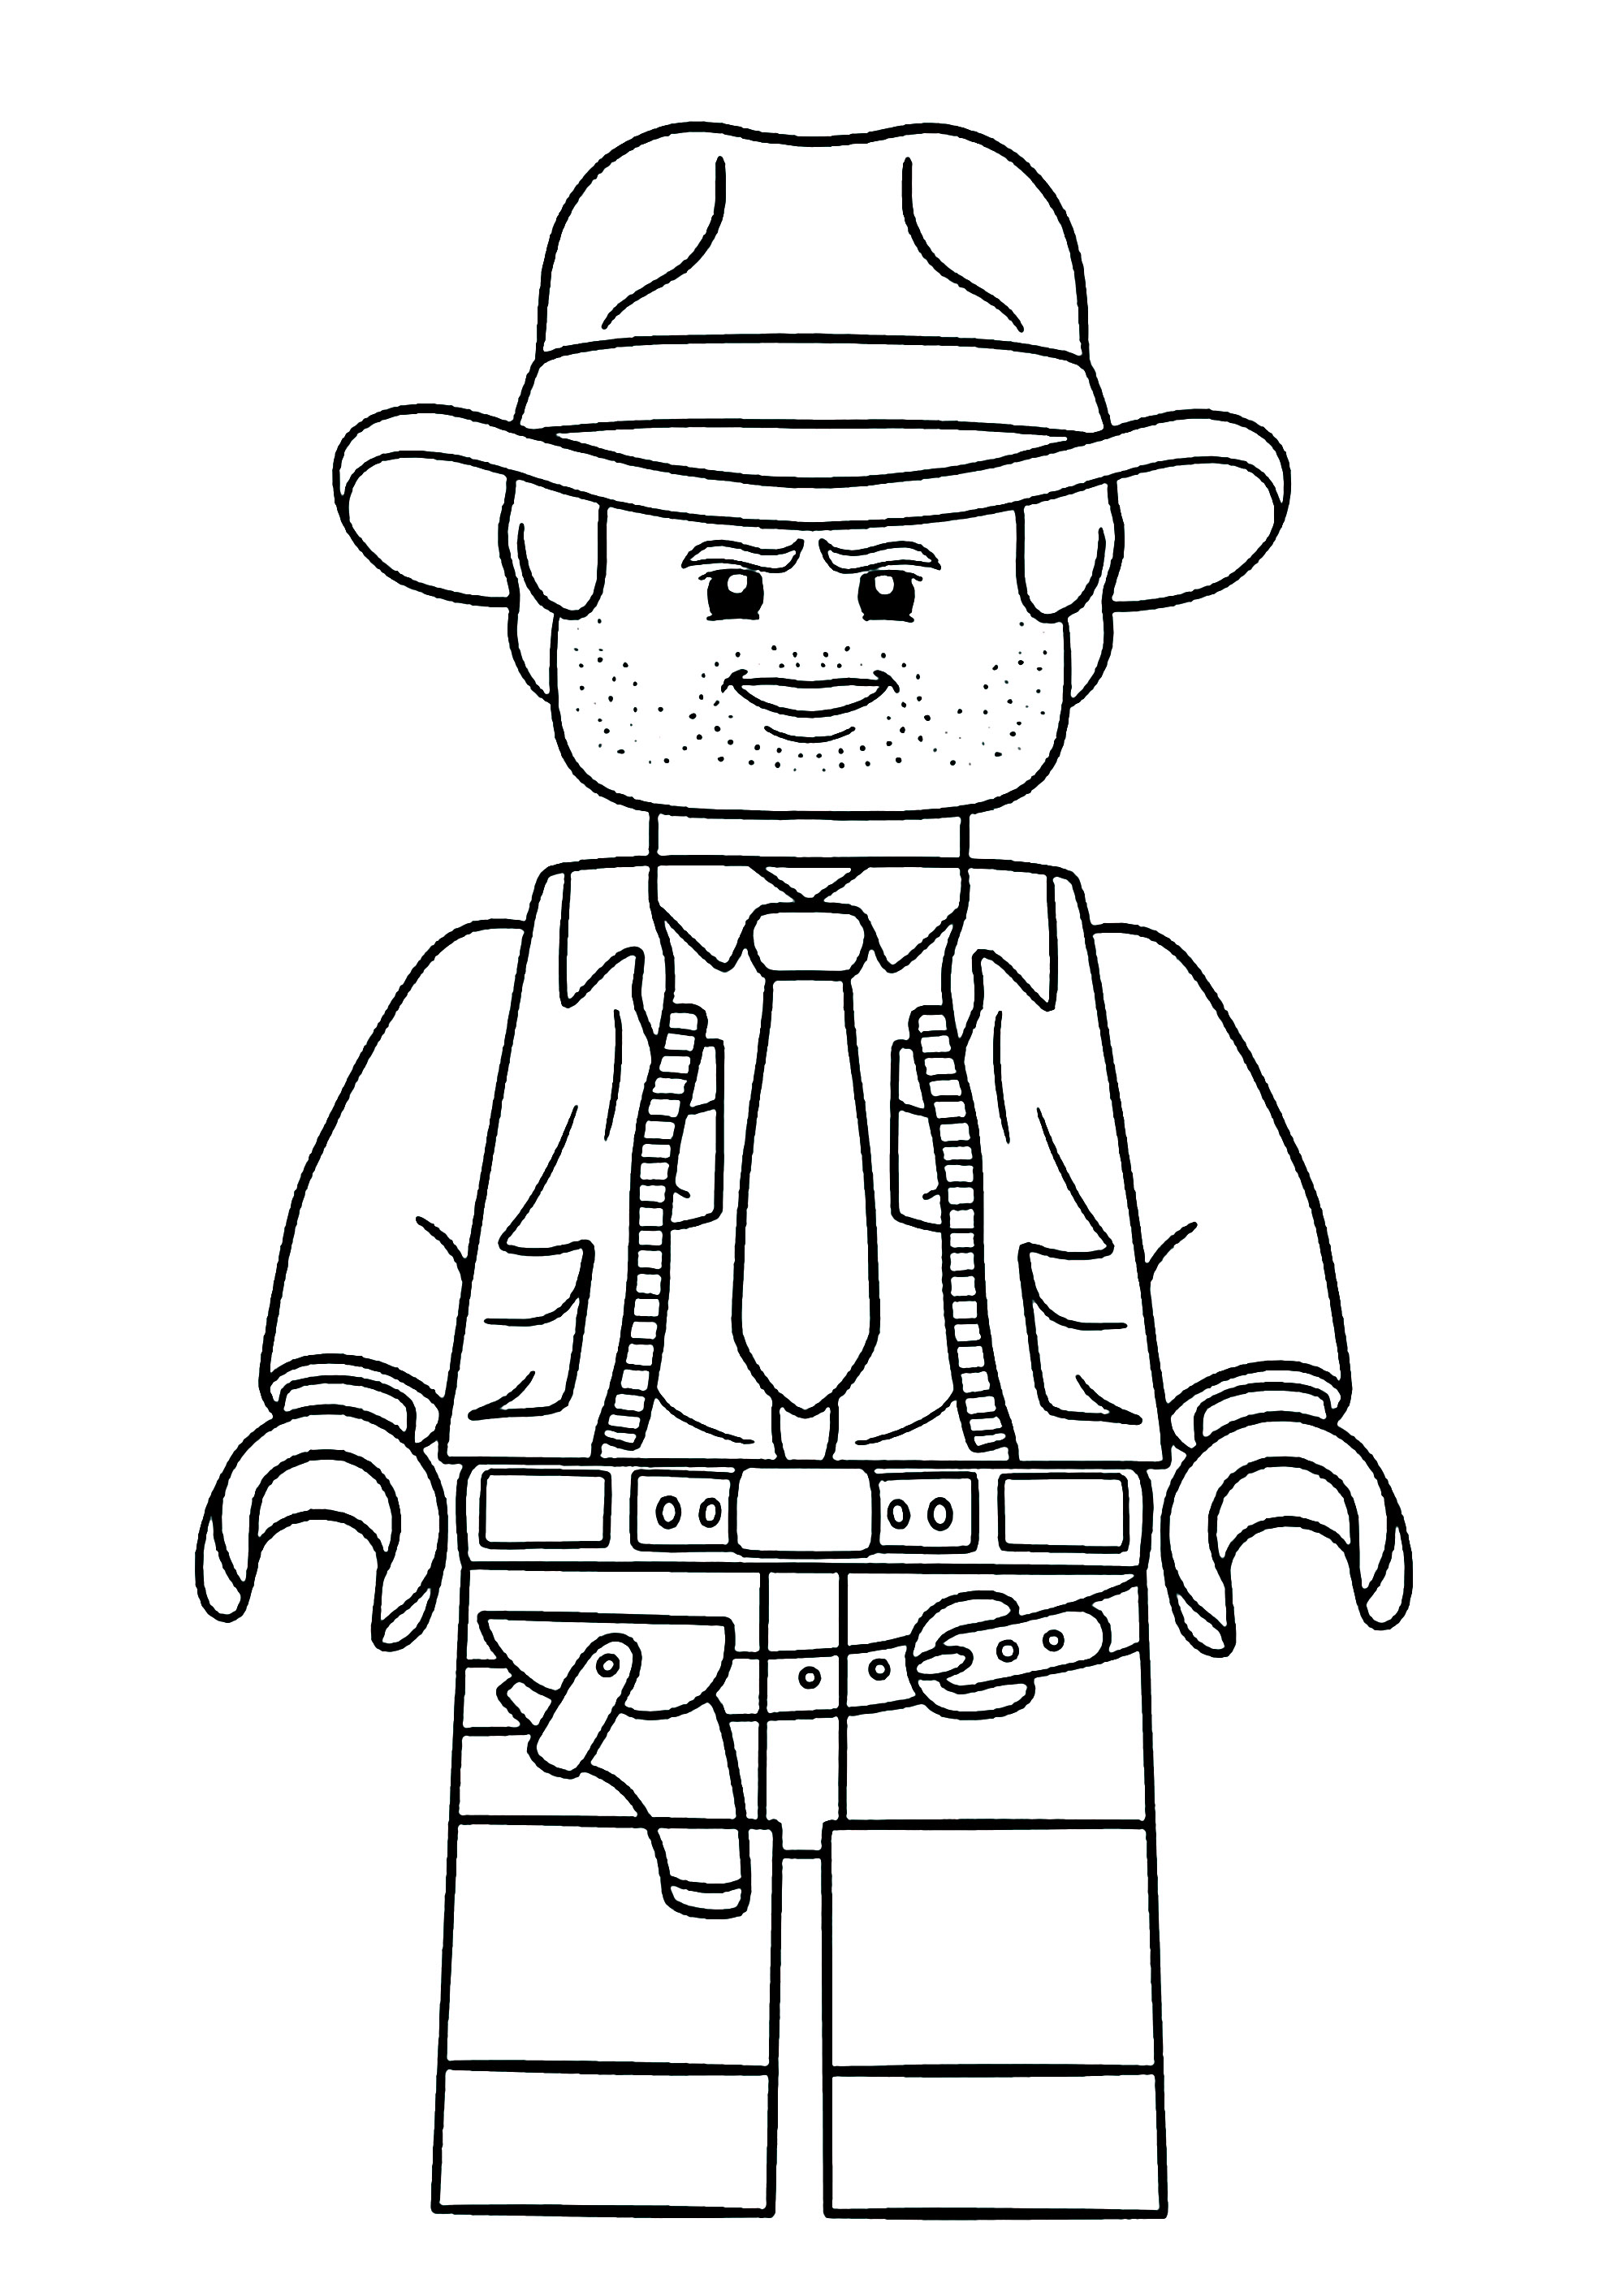 Funny free Indiana Jones coloring page to print and color